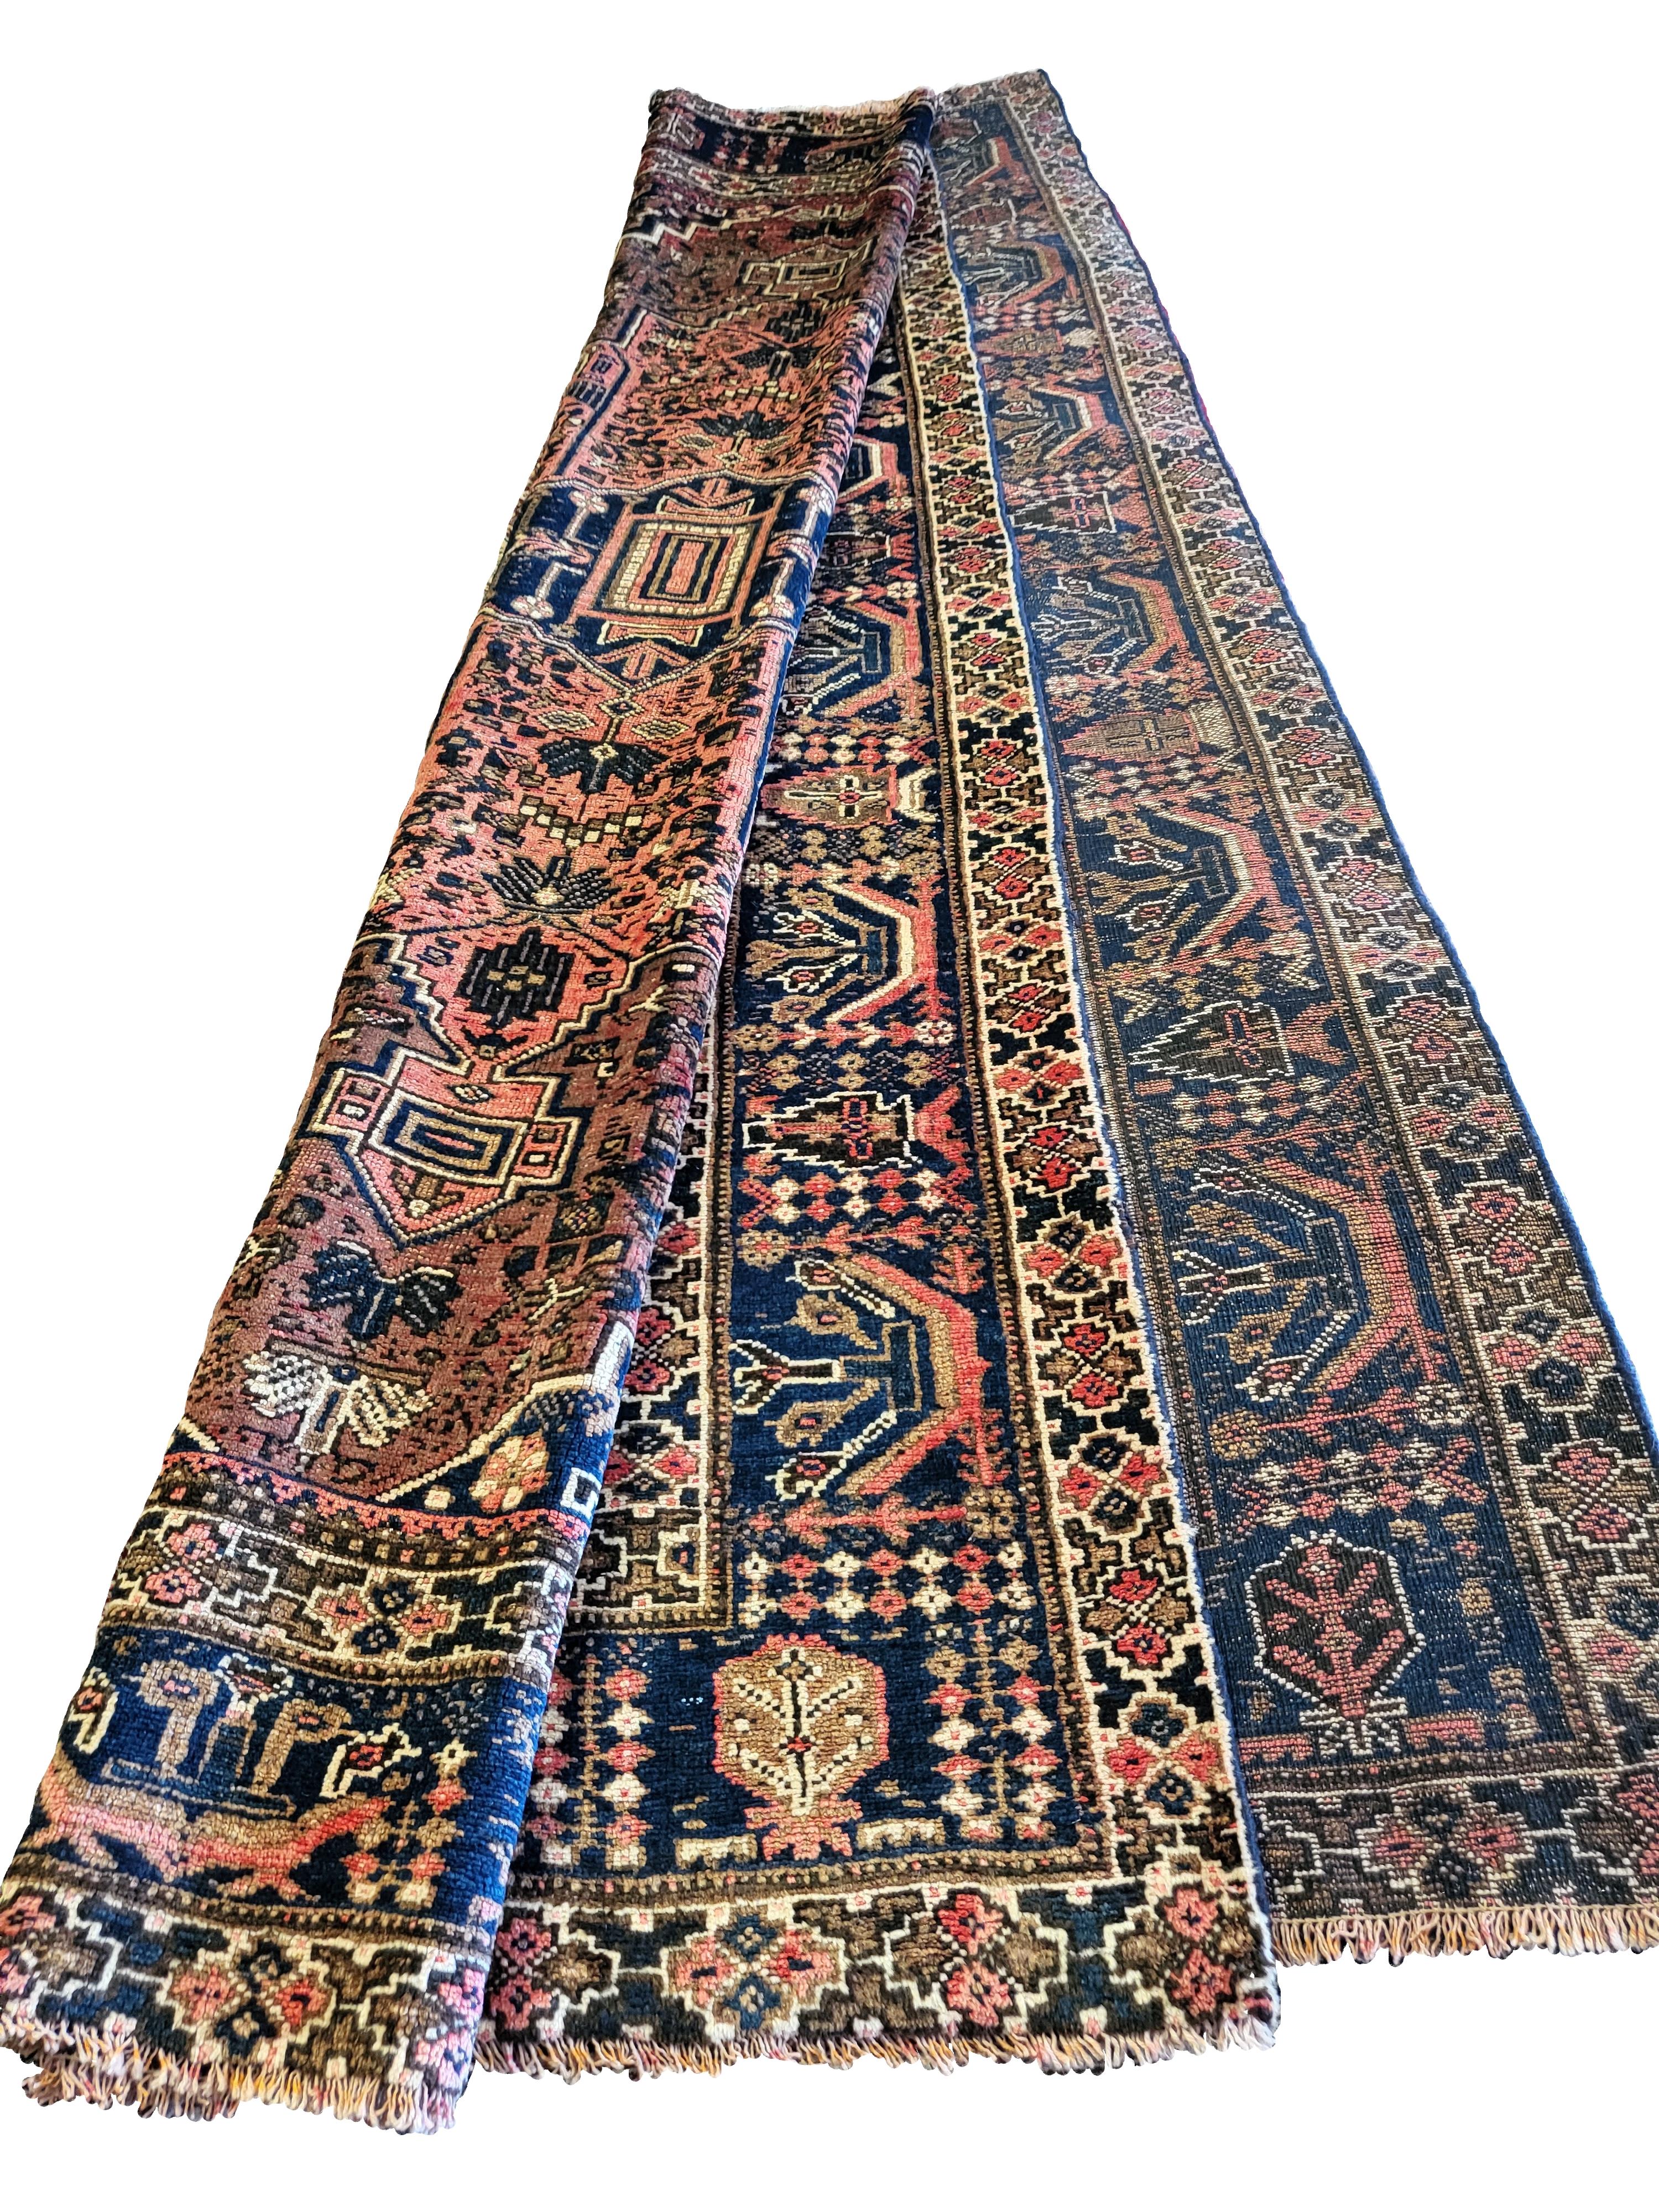 Hand-Knotted Ancient Shiraz / Qashqai - Geometric Tribal Persian Rug, PRG Exclusive For Sale